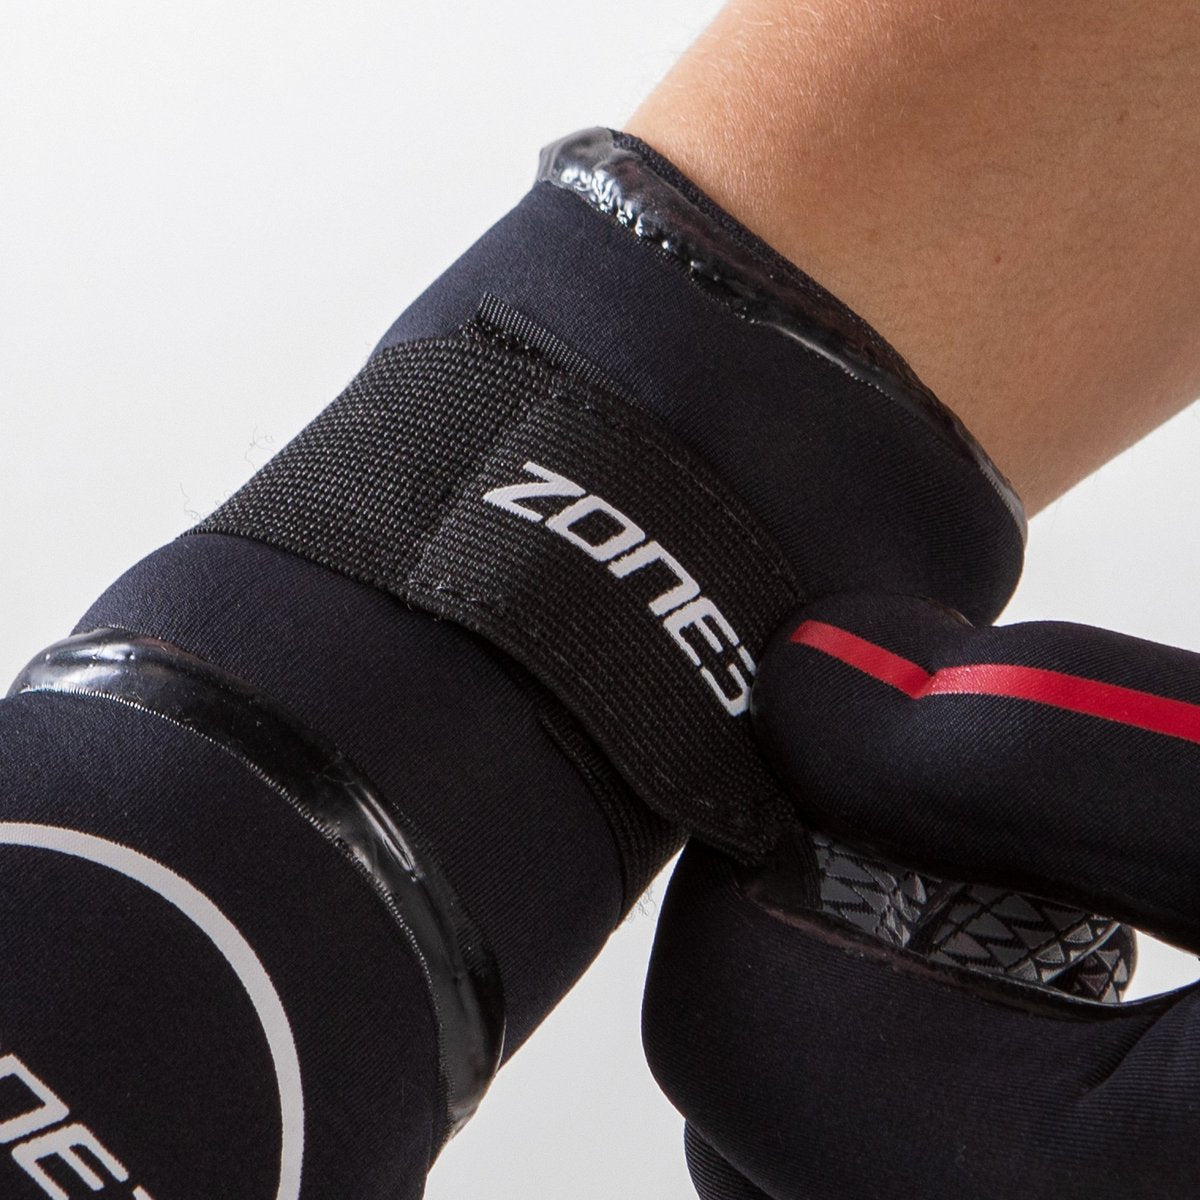 Close up of the wrist of the Zone 3 Heat Tech Warmth Neoprene Gloves for Cold Water Swimming. The Velcro wrist strap is in the shot showing the persons hand securing the Velcro strip.